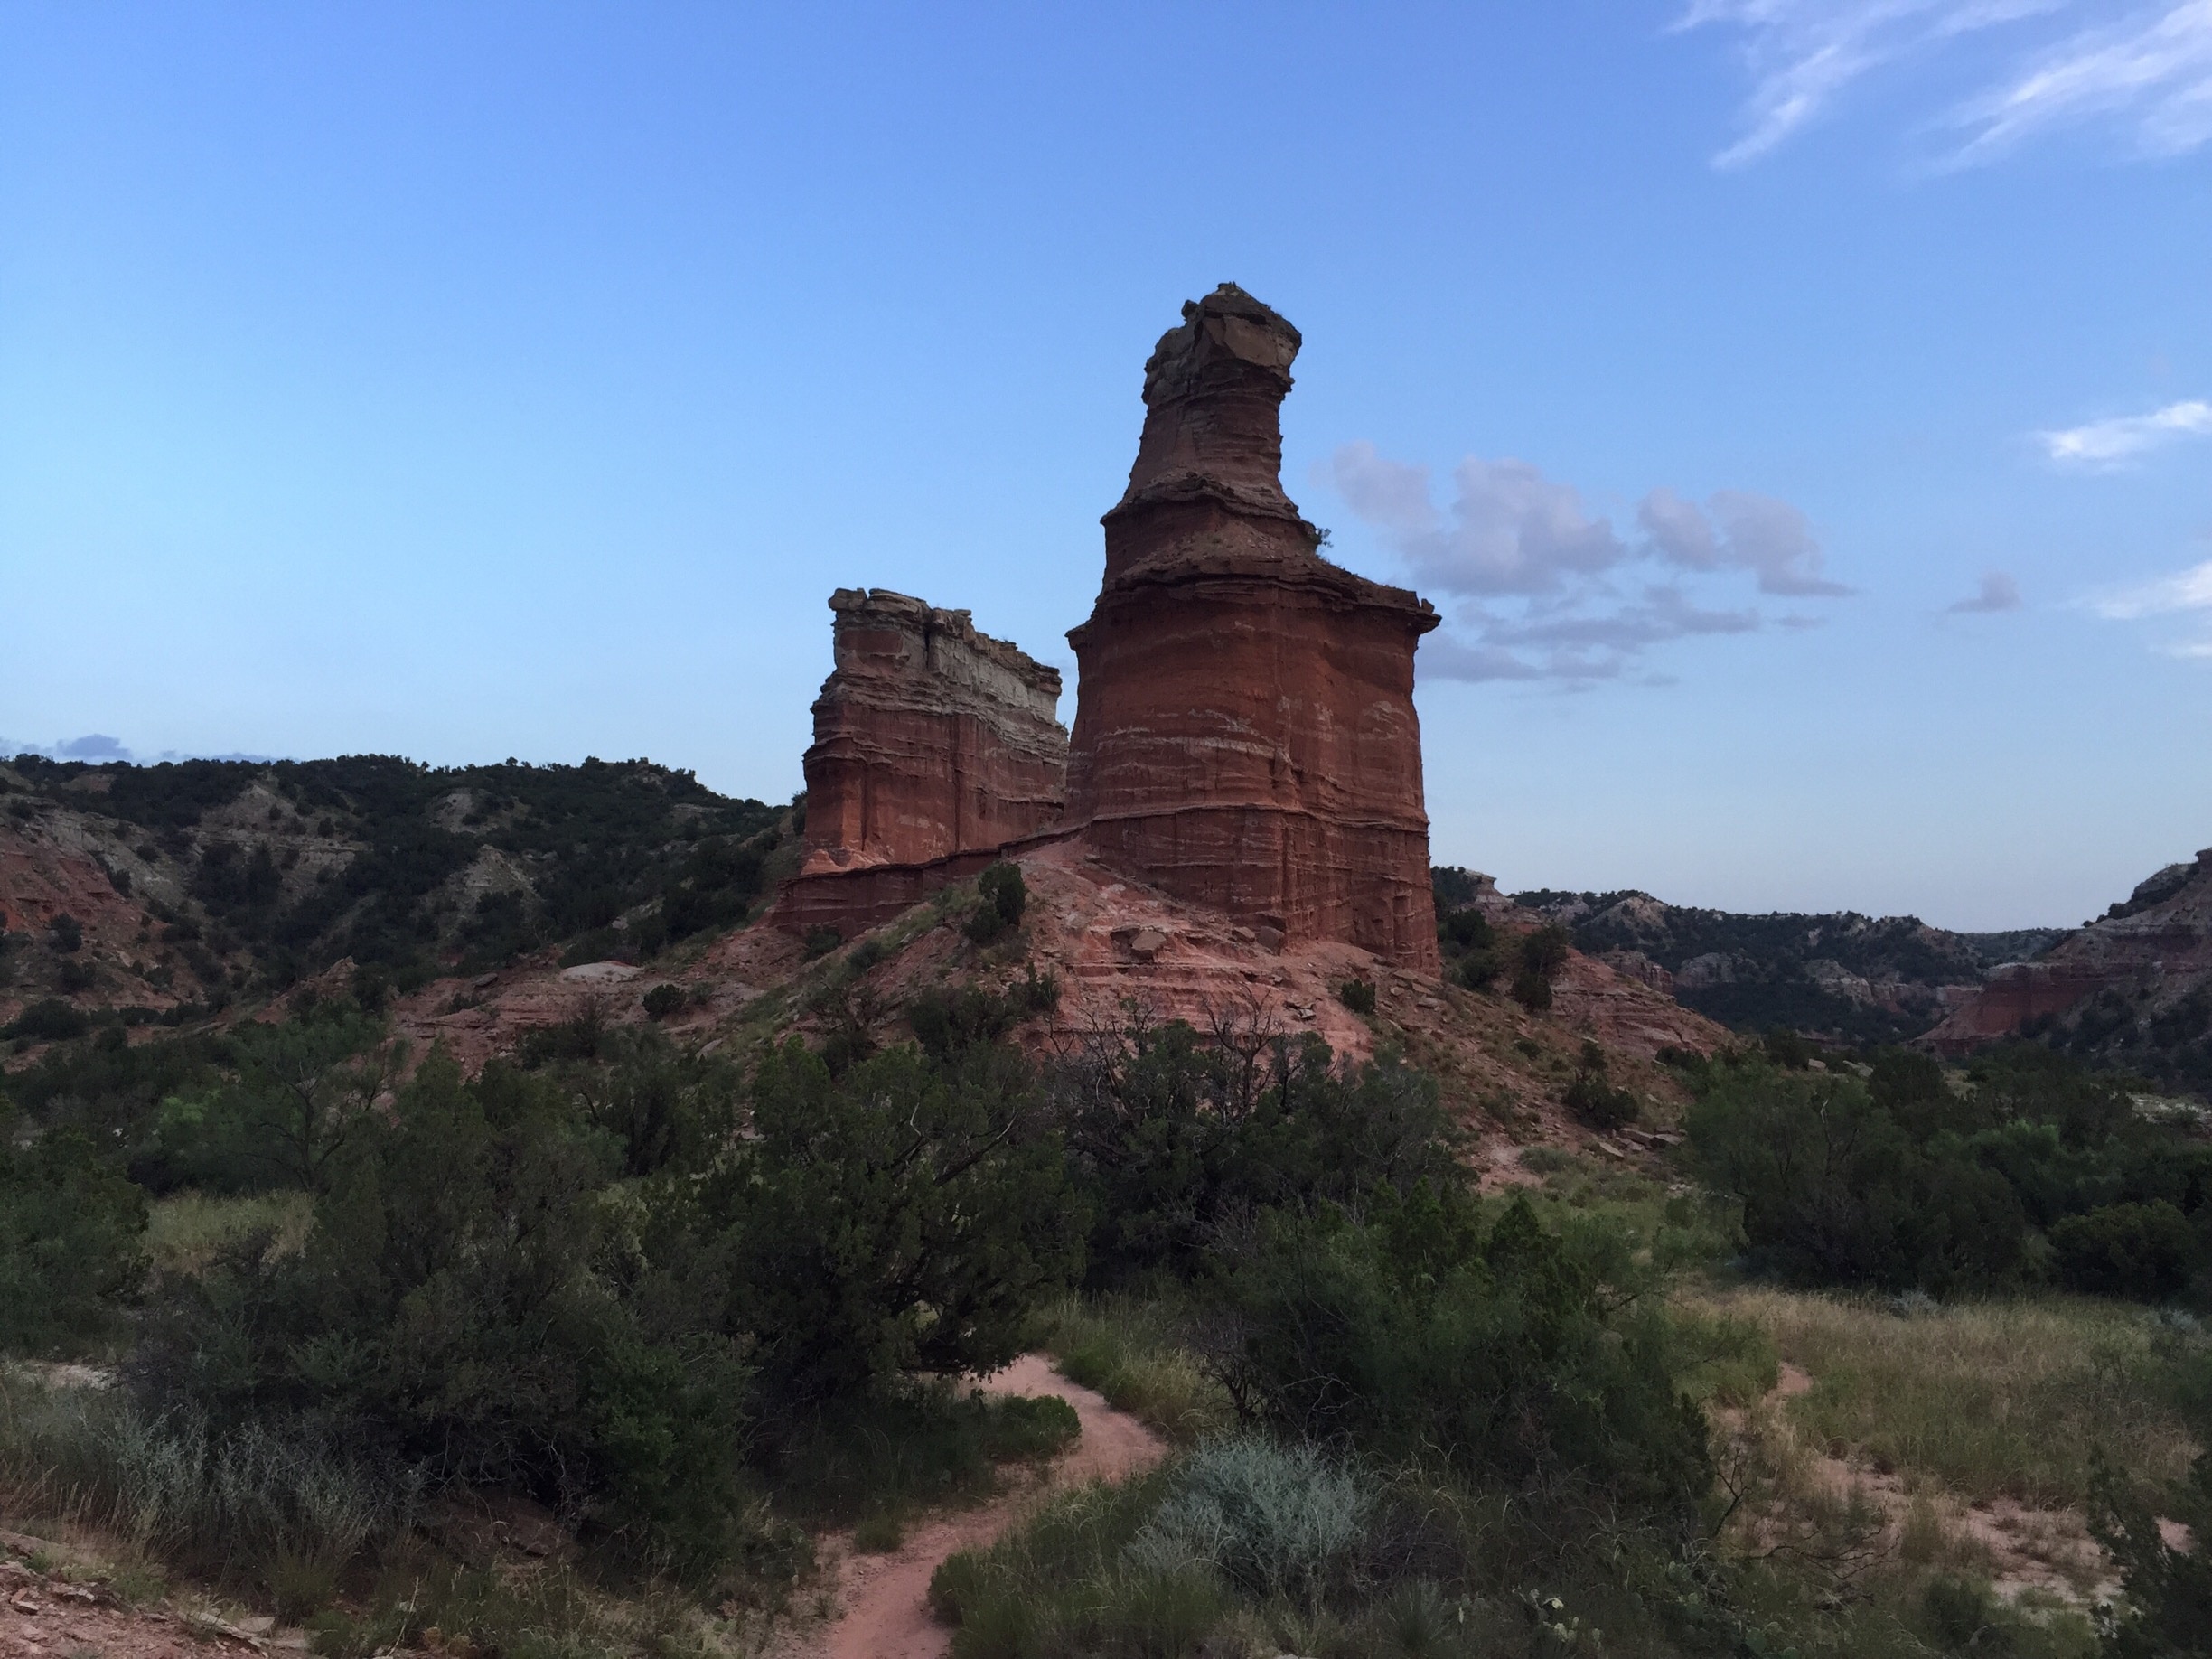 The Lighthouse trail is a winding 6 mile round trip trek through the heart of the 2nd largest canyon in the United States. The destination is this monumental hoodoo known as Lighthouse Rock. 